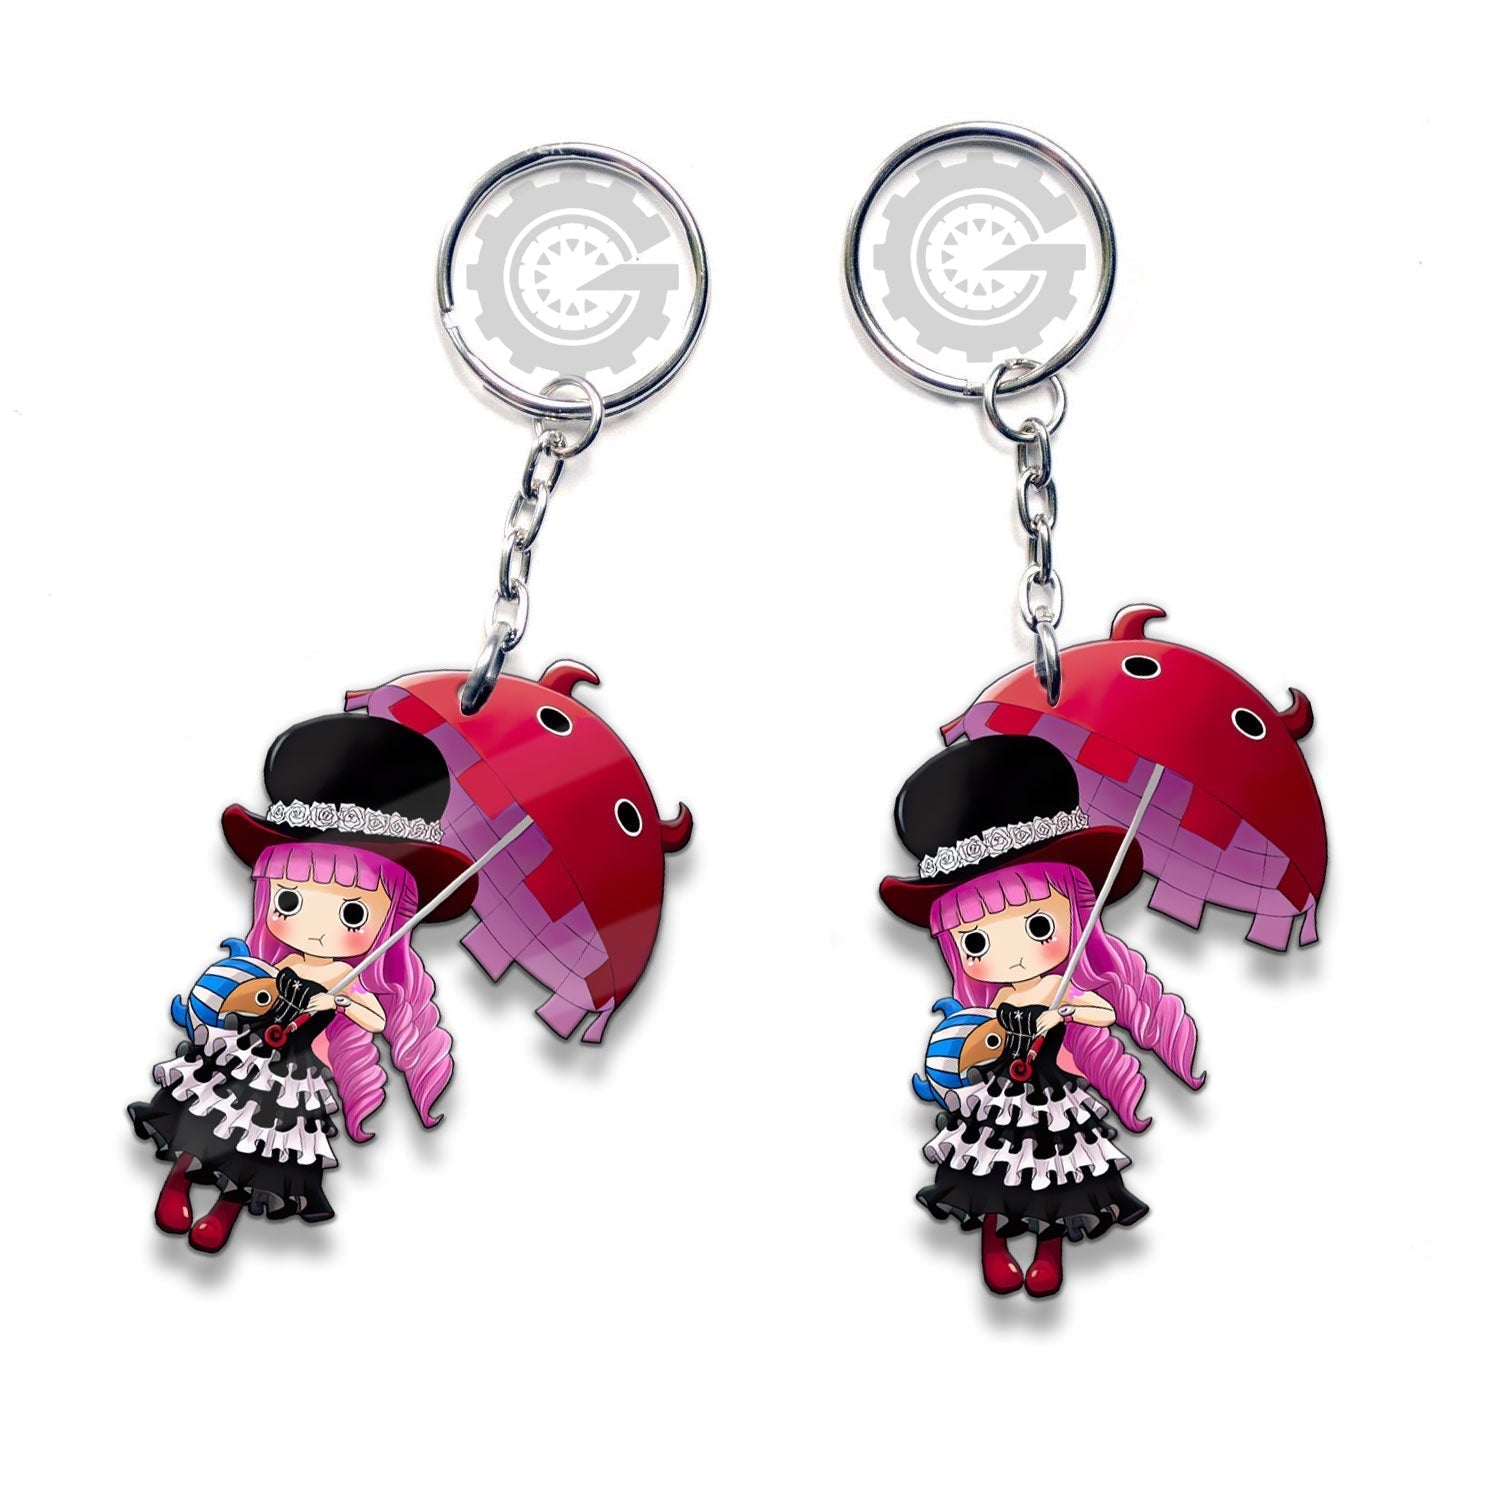 Perona Keychains Custom Car Accessories - Gearcarcover - 3